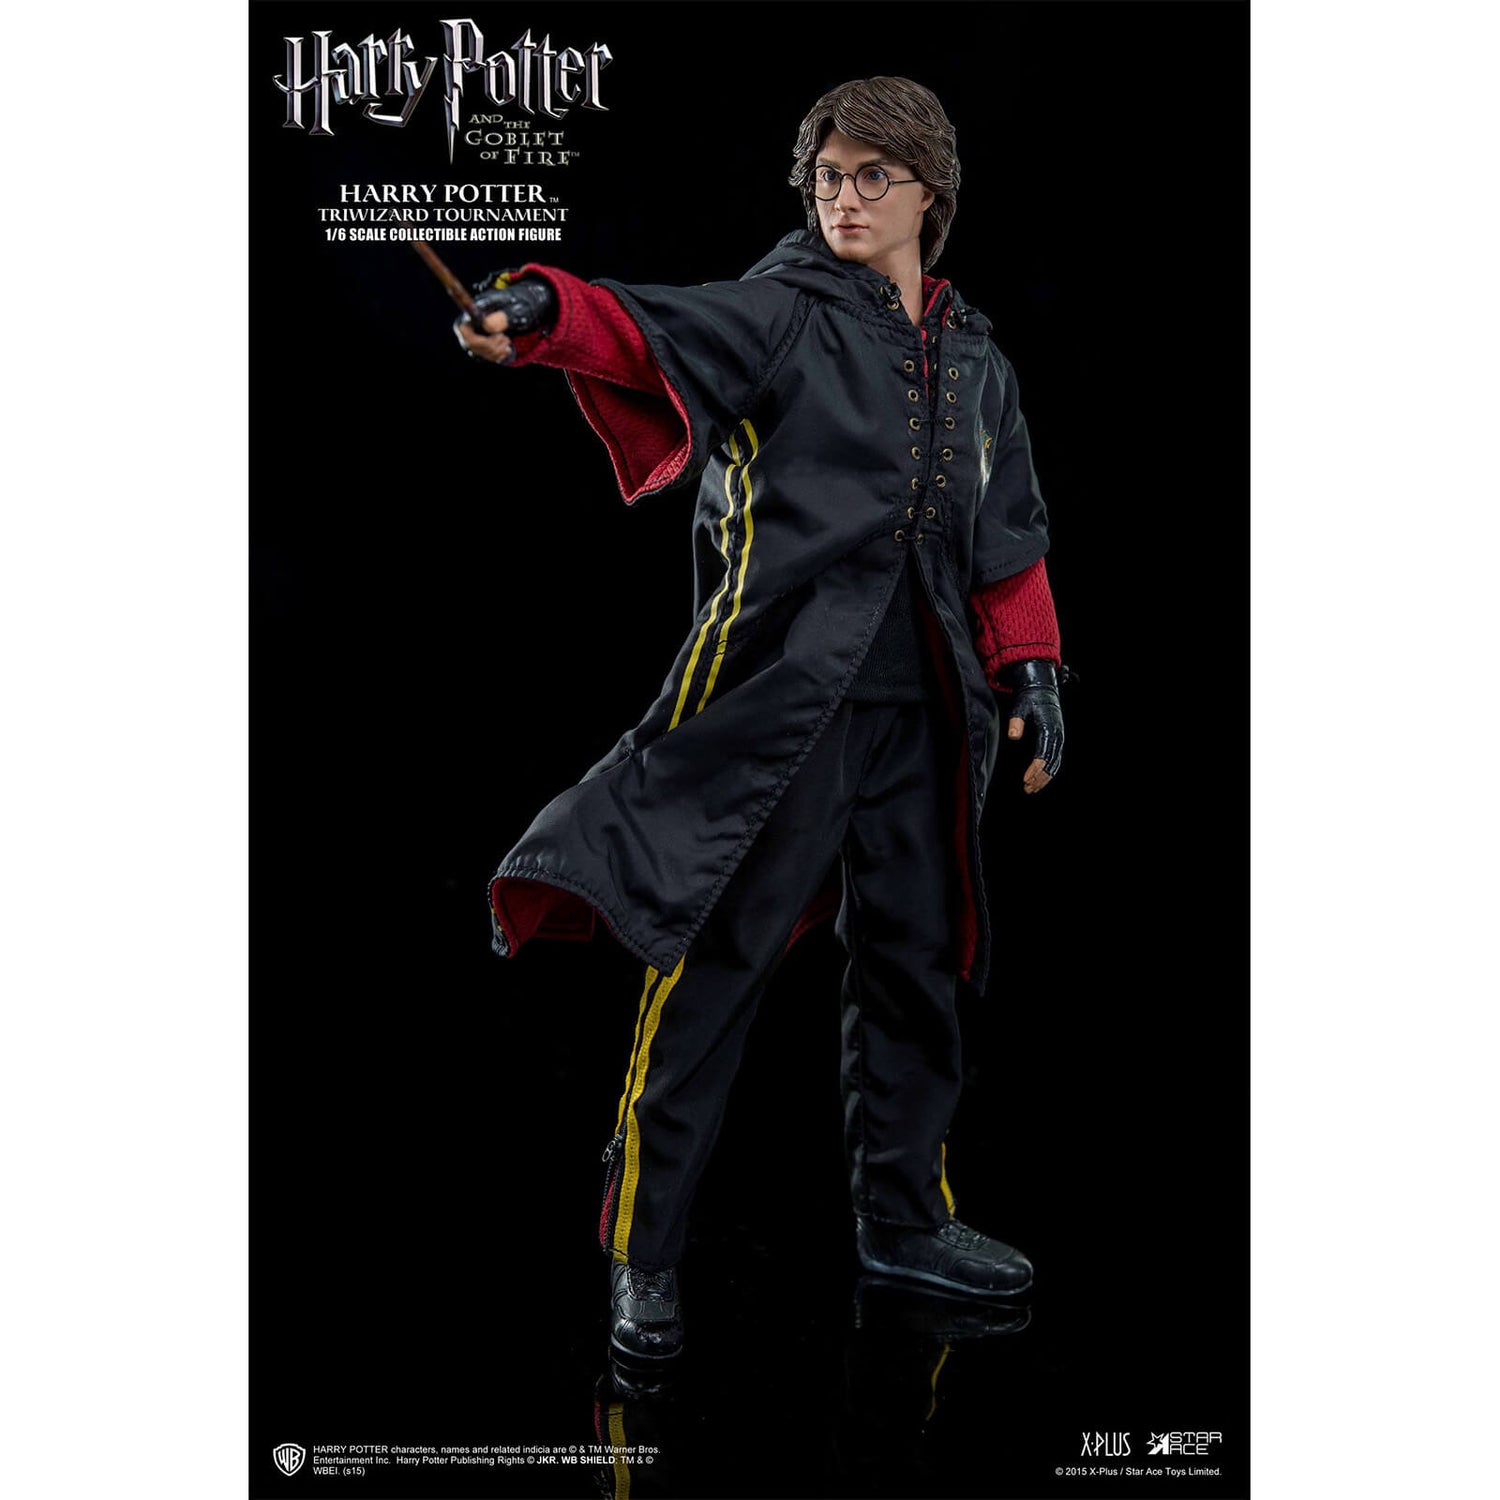 Harry Potter My Favourite Movie Actionfigur im Maßstab 1:6 Maßstab Harry at the Triwizard Tournament 29 cm Star Ace